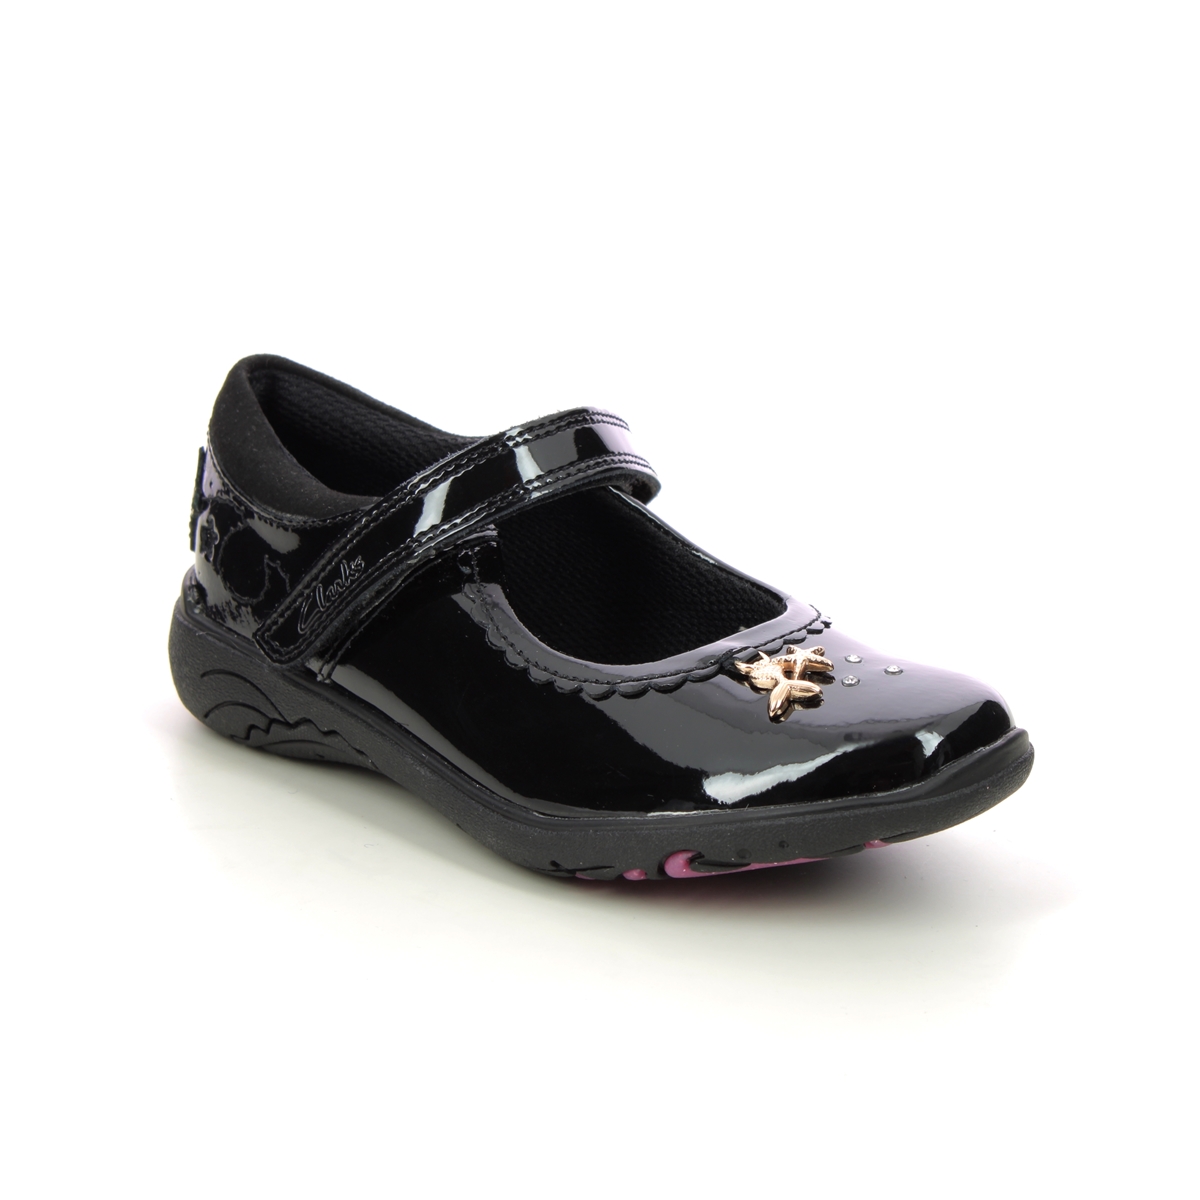 Clarks Relda Sea K Mary Jane Black Patent Kids Girls School Shoes 722418H In Size 12 In Plain Black Patent H Width Fitting Extra Wide For School For k